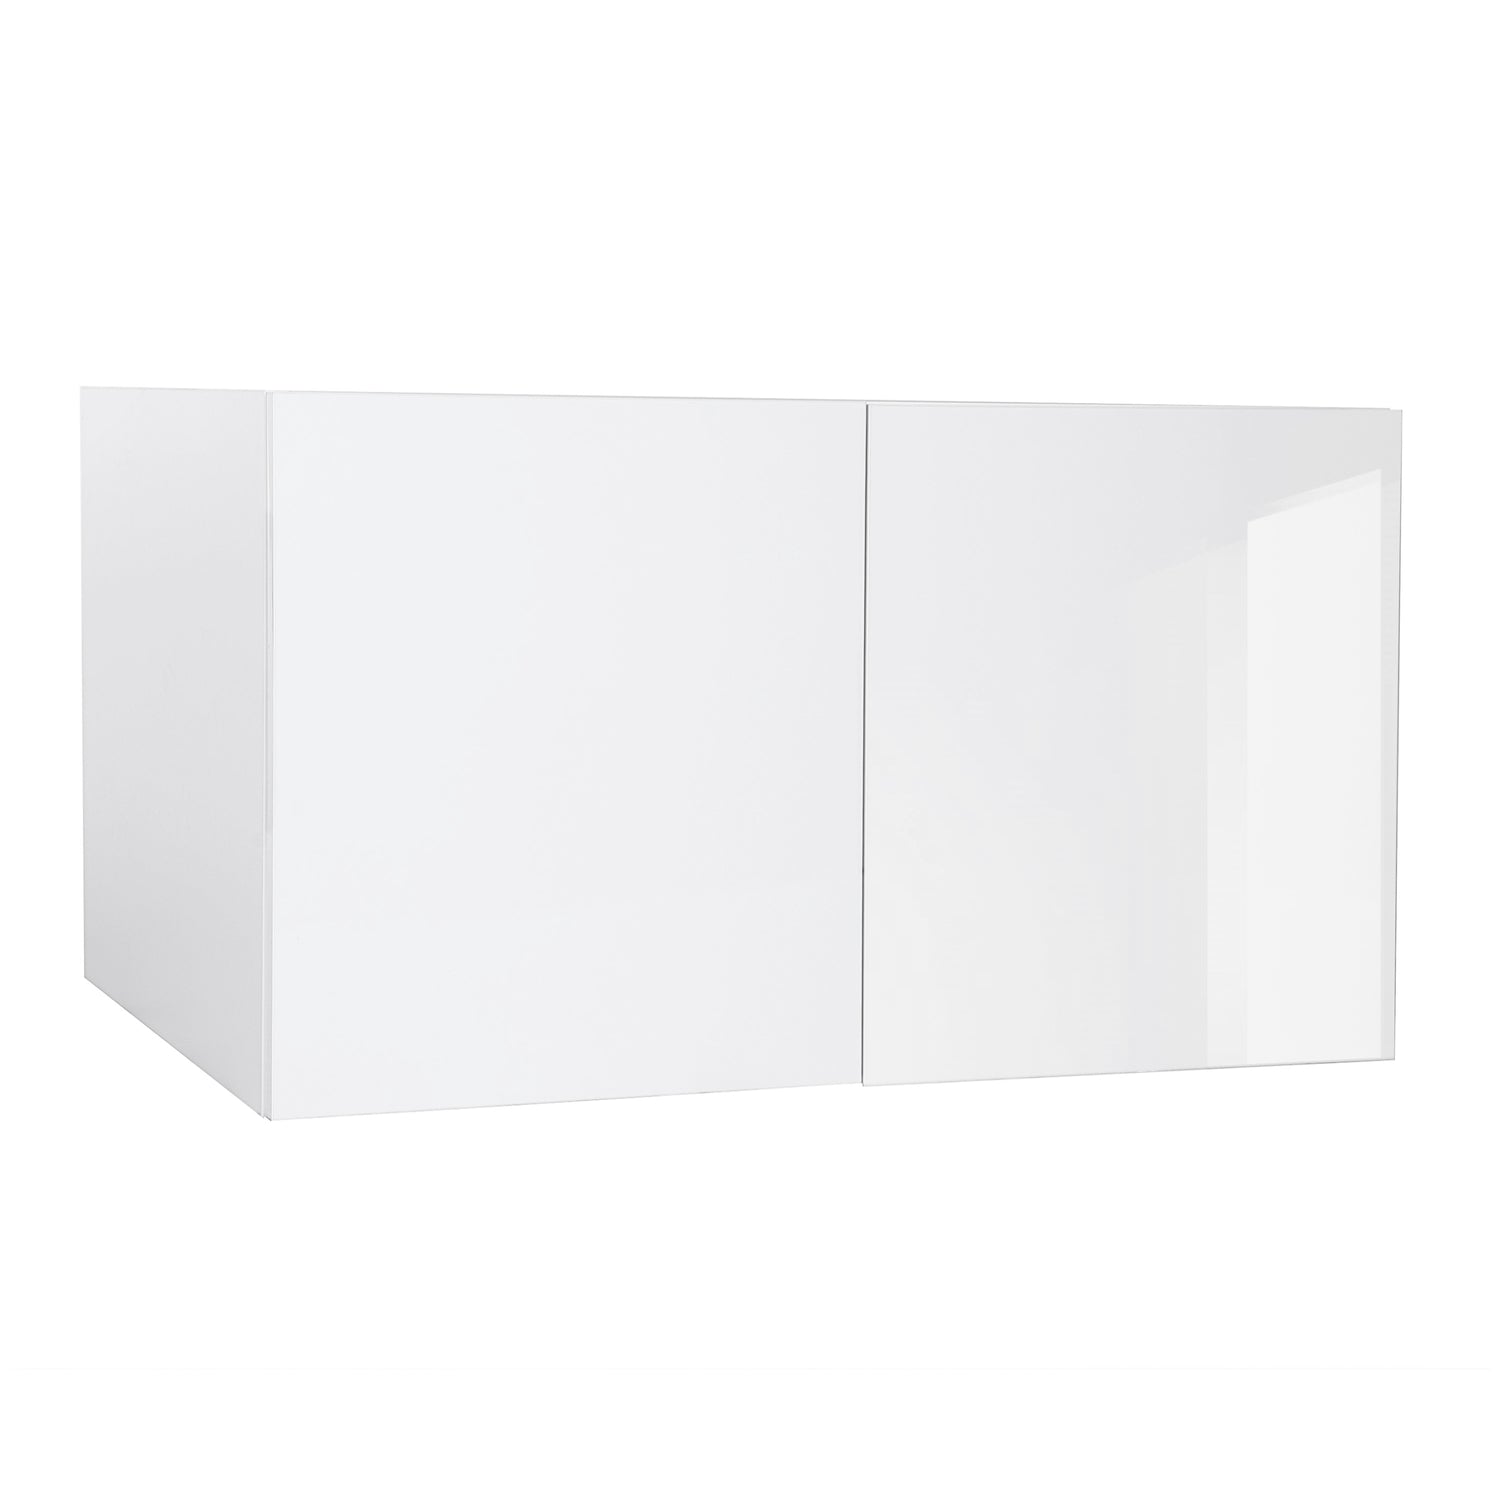 Quick Assemble Modern Style with Soft Close 36 in x 18 in Wall Bridge Kitchen Cabinet (36 in W x 18 in H x 24 in D) -  Pro-Edge HD